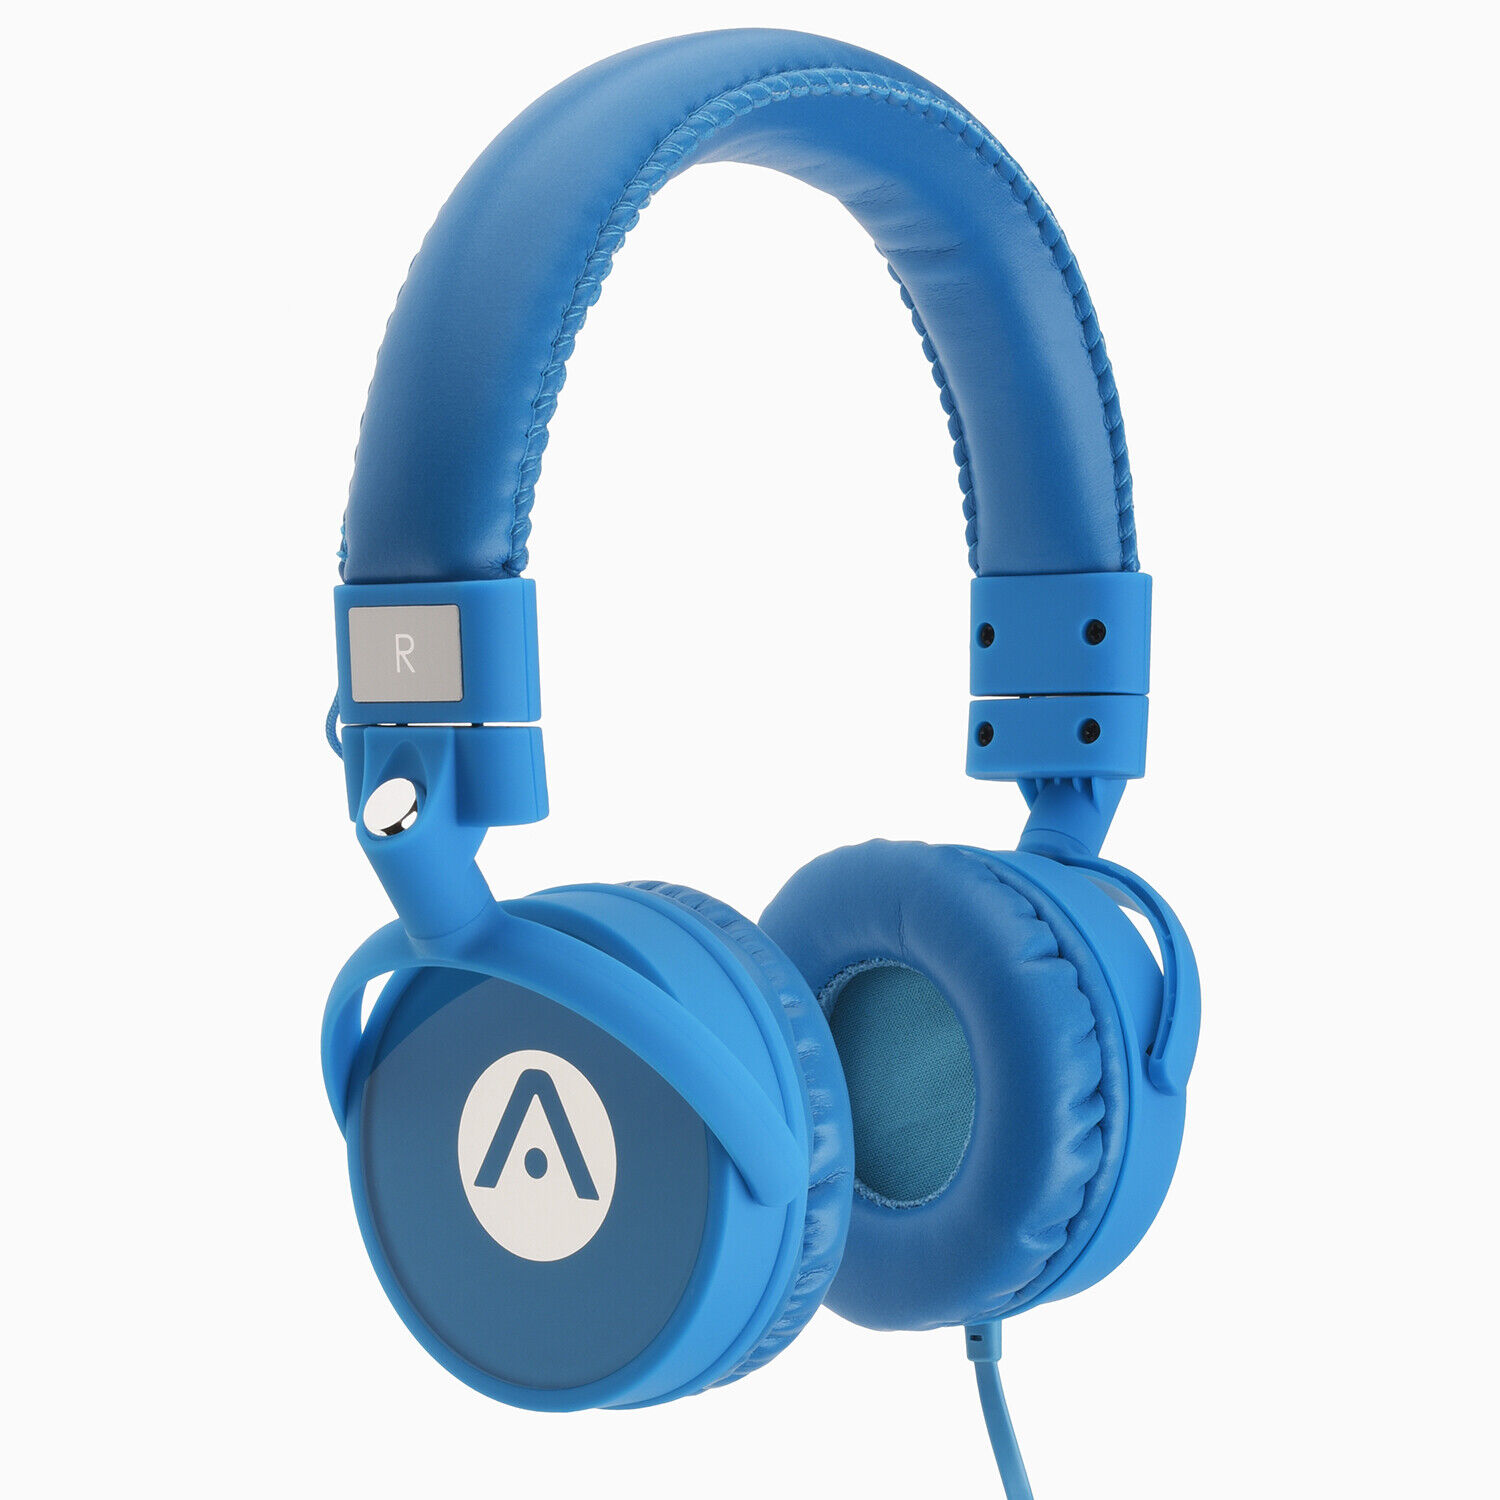 Audiomate Noise-isolating Wired Stereo Microphone On-Ear Headphones (Blue)